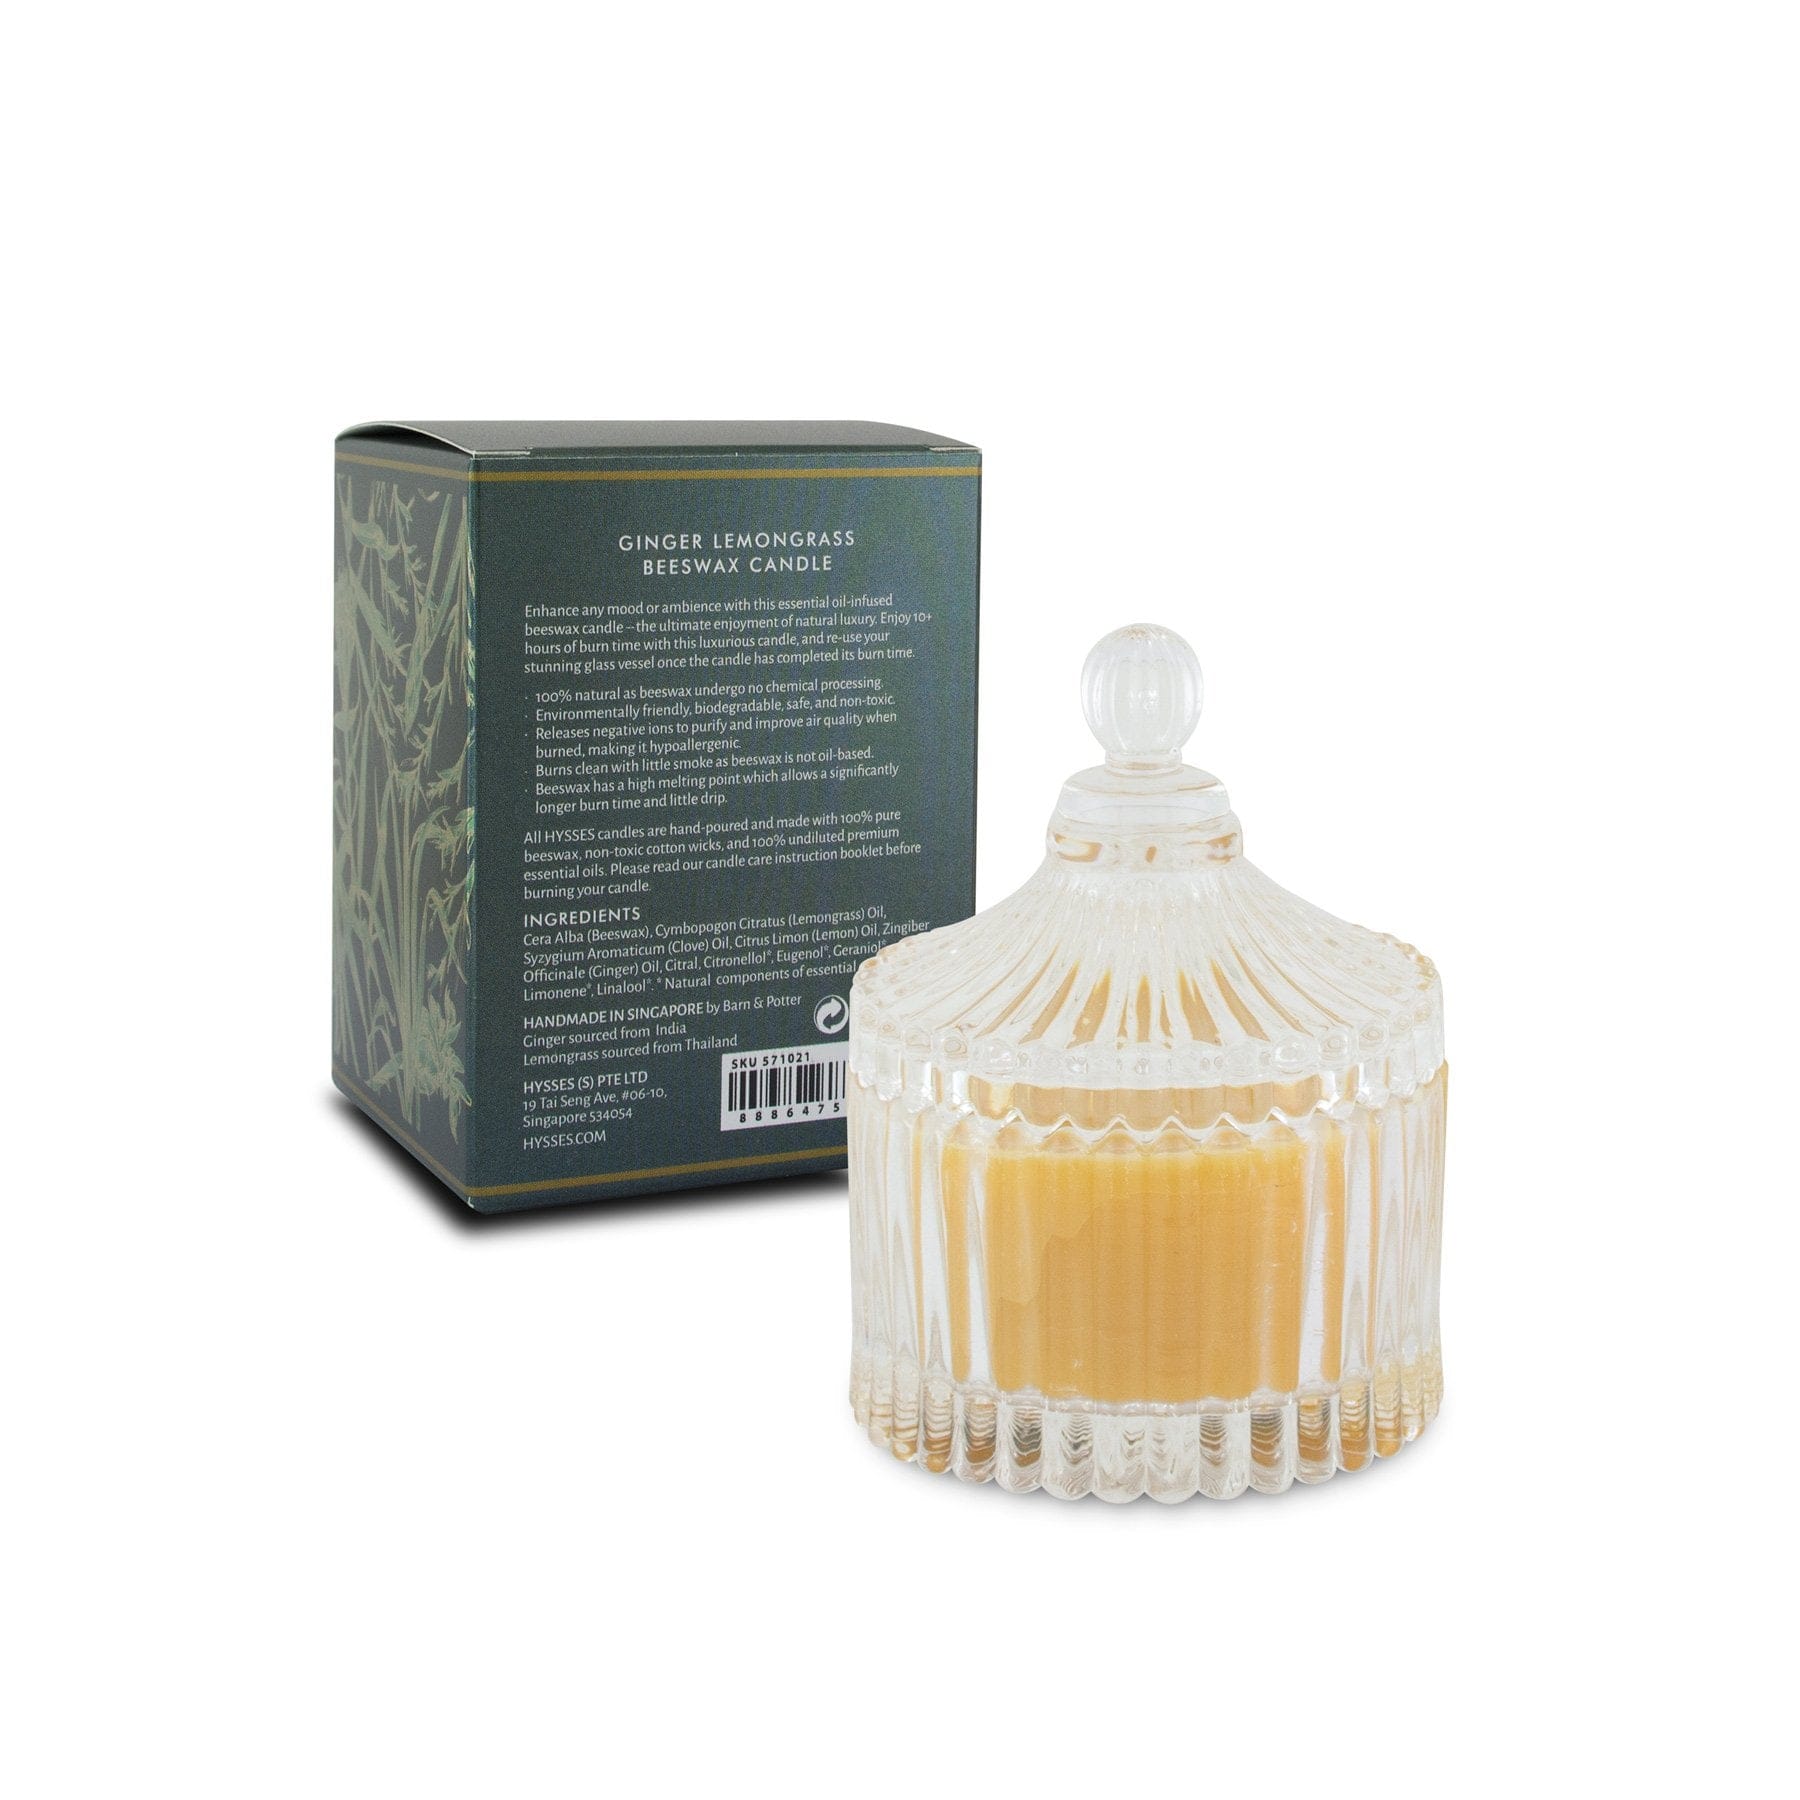 Hysses Home Scents 200g Beeswax Candle Ginger Lemongrass 200g